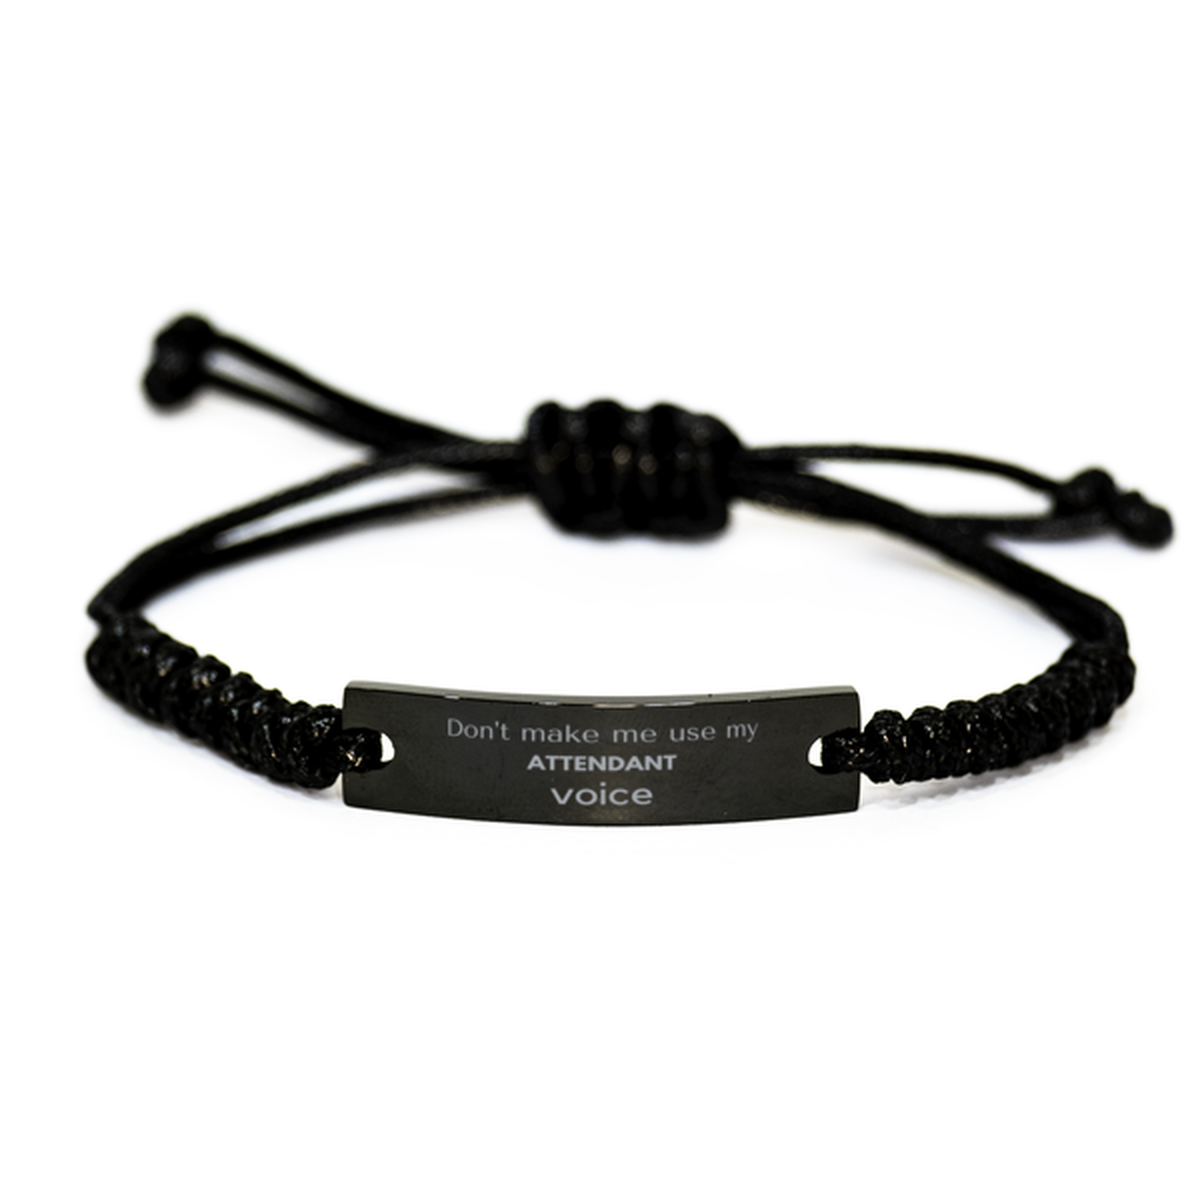 Don't make me use my Attendant voice, Sarcasm Attendant Gifts, Christmas Attendant Black Rope Bracelet Birthday Unique Gifts For Attendant Coworkers, Men, Women, Colleague, Friends